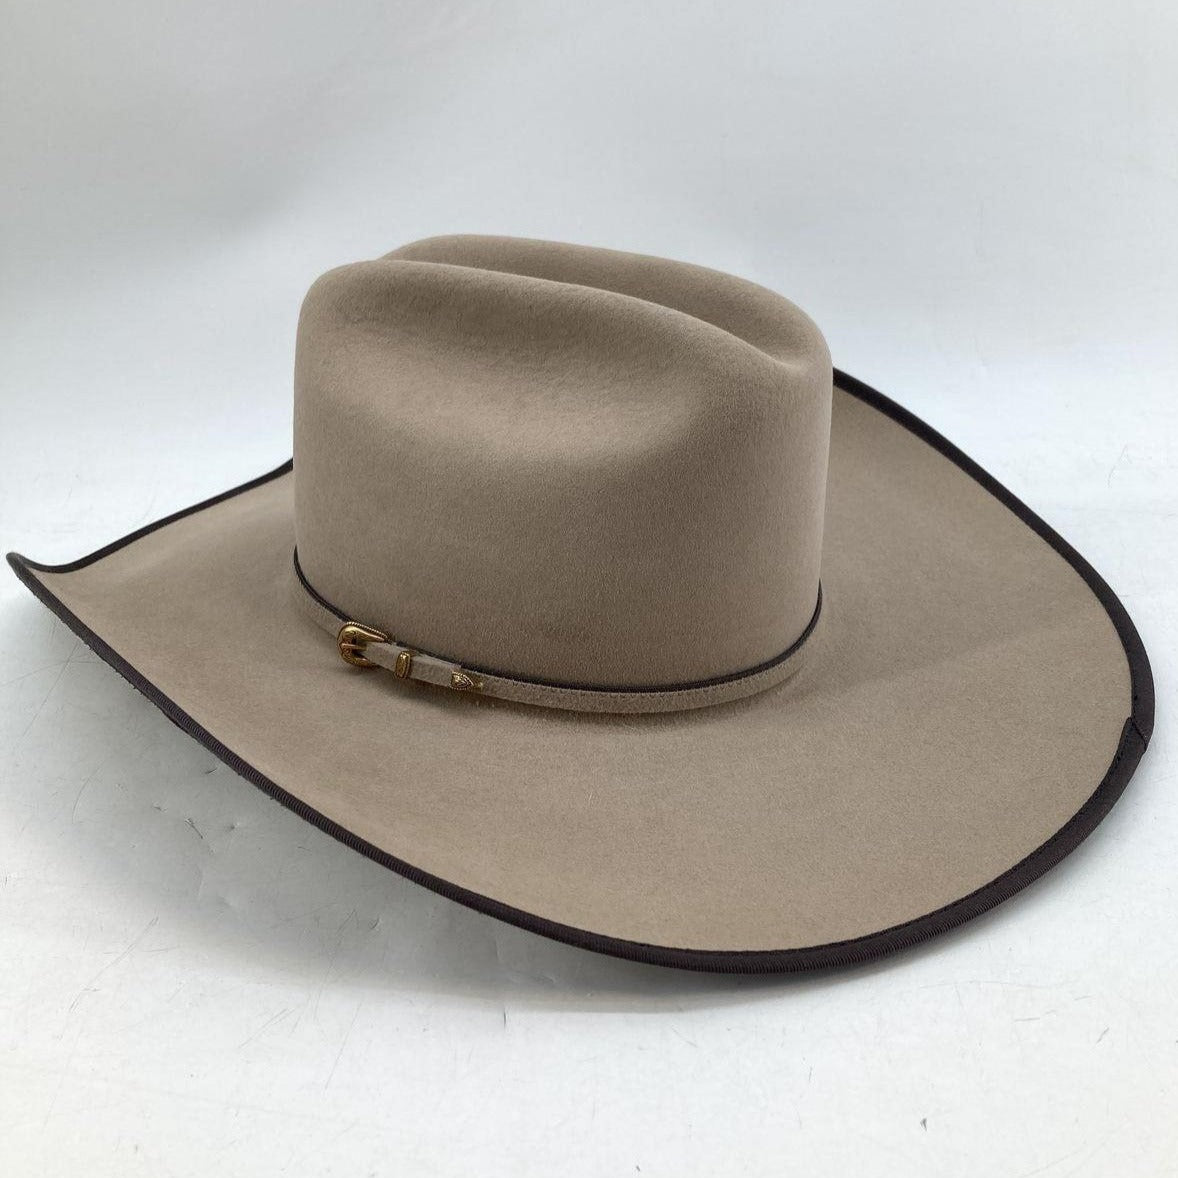 Rodeo King 10x Western Hat - Size 7